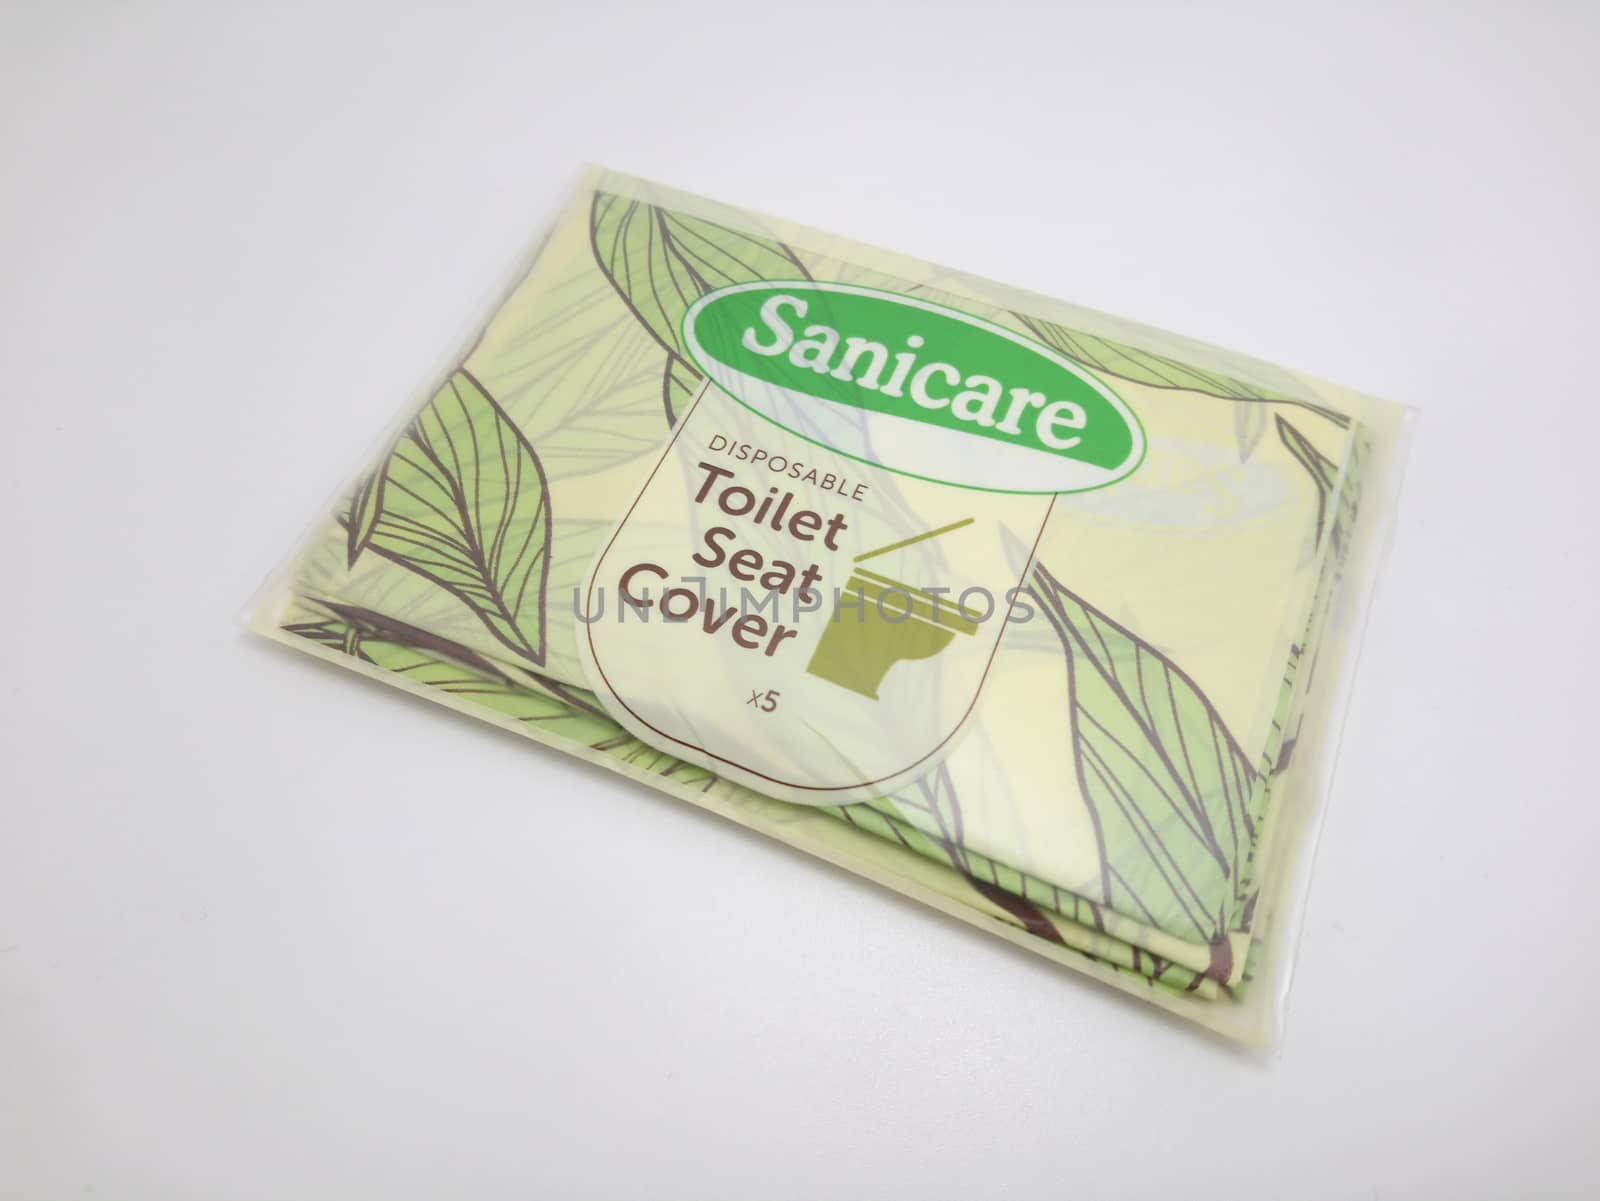 Sanicare toilet seat cover in Manila, Philippines by imwaltersy